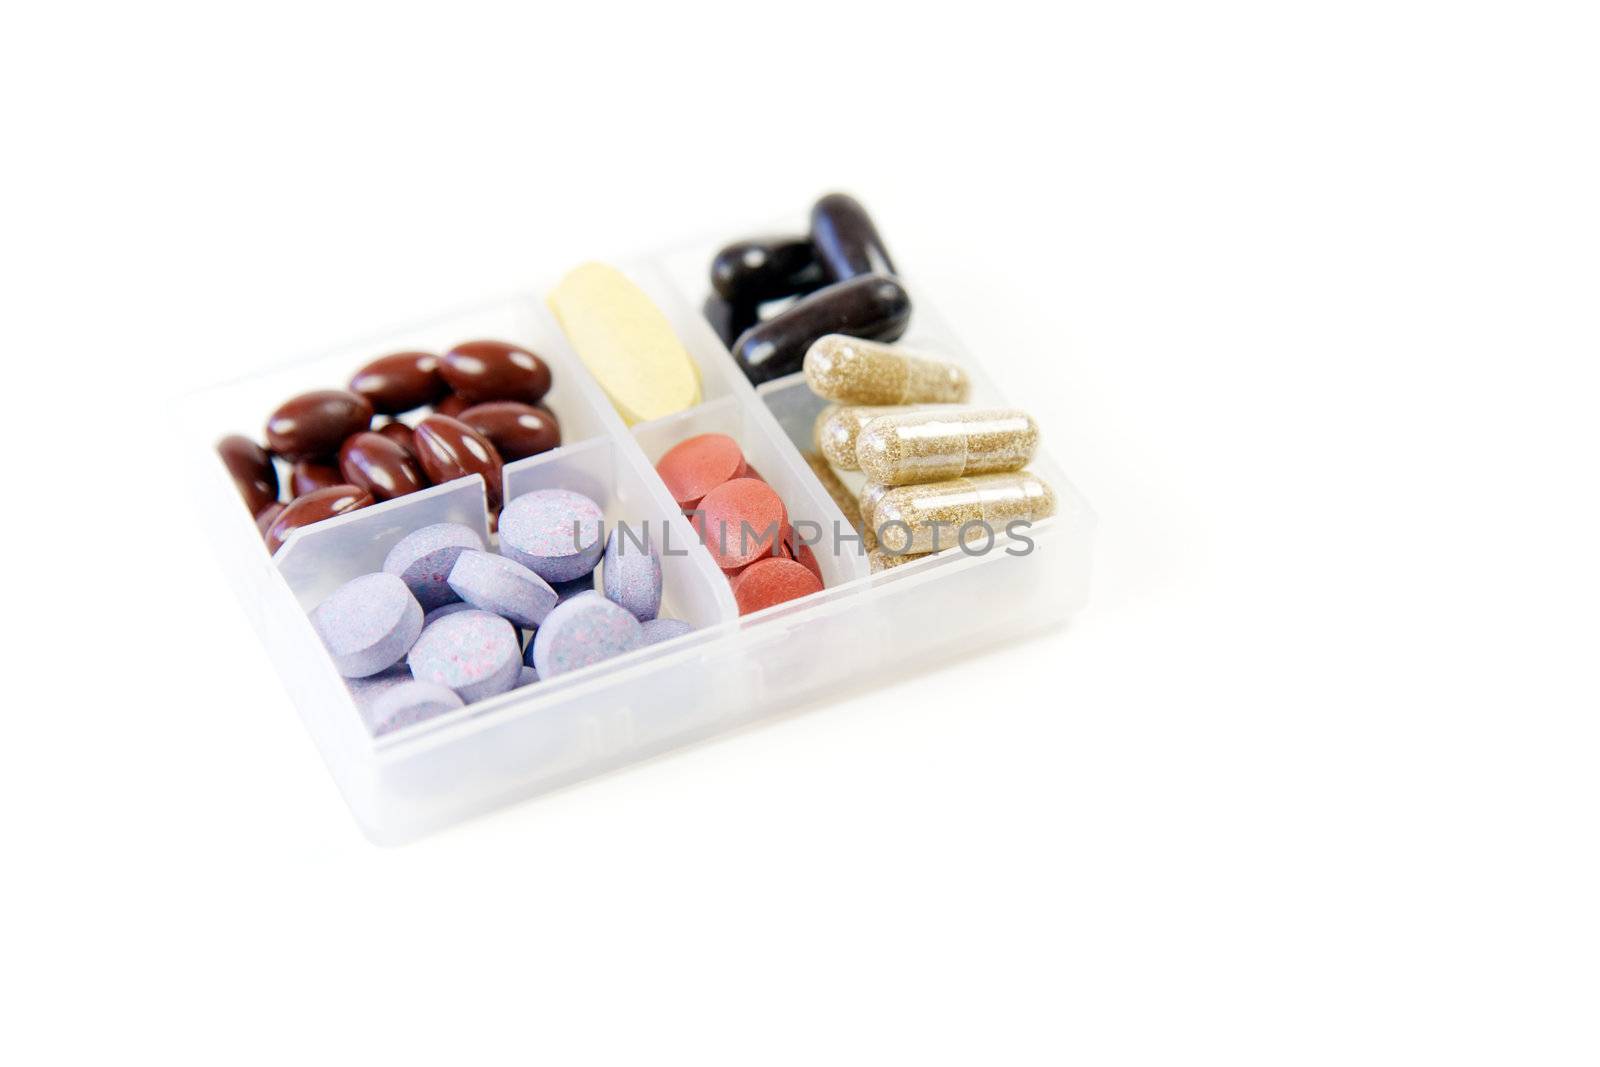 Pills and capsules by instinia